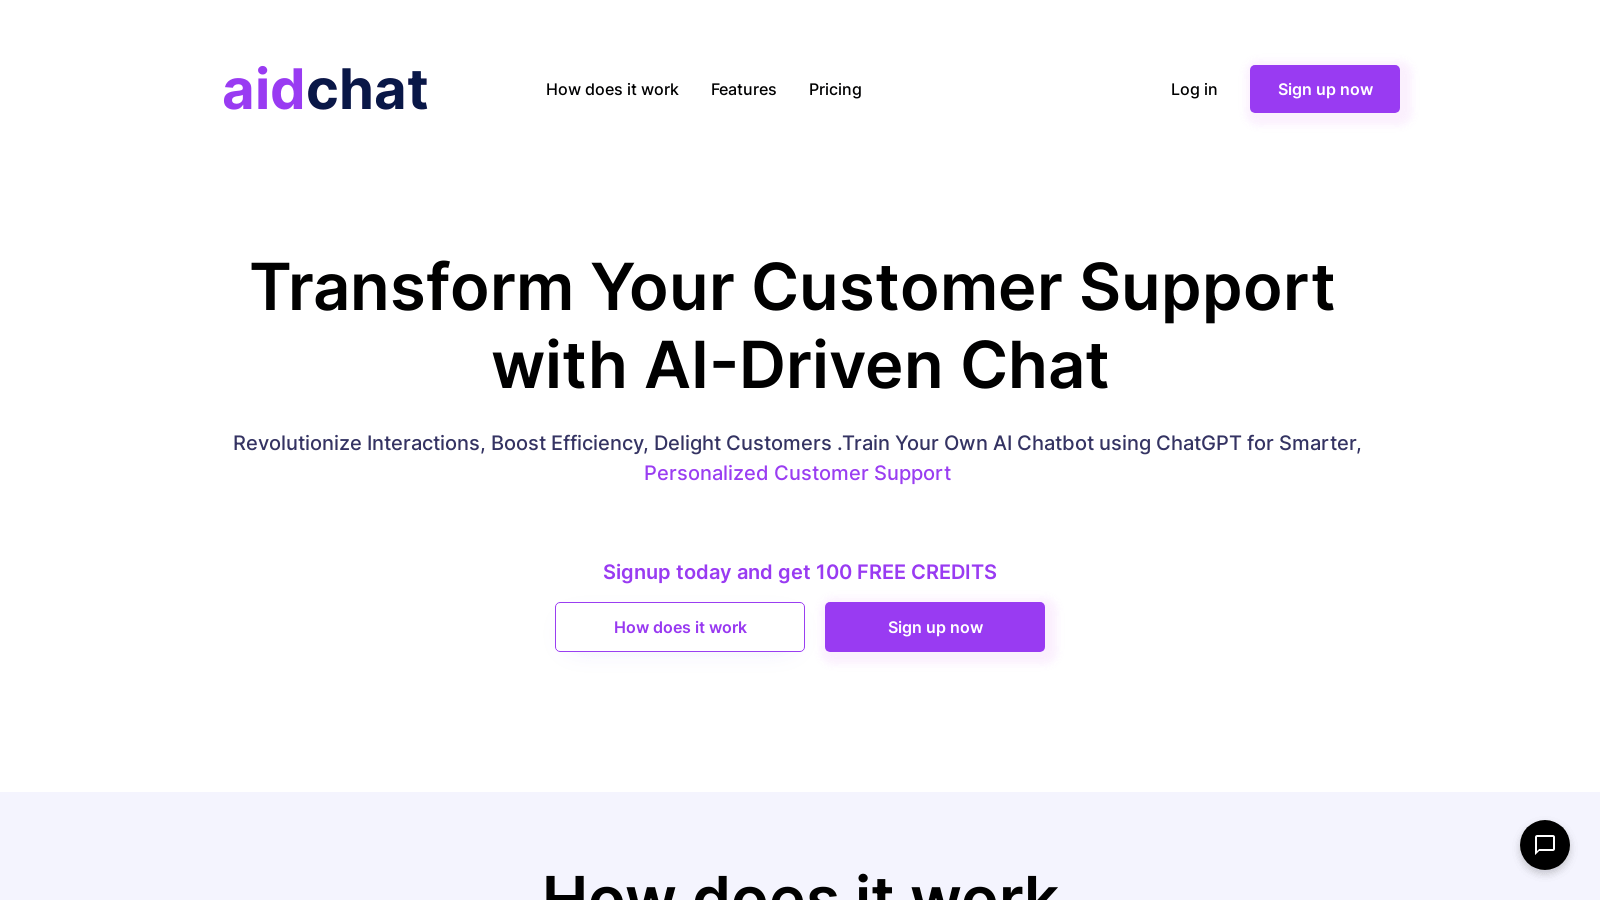 aidchat.co